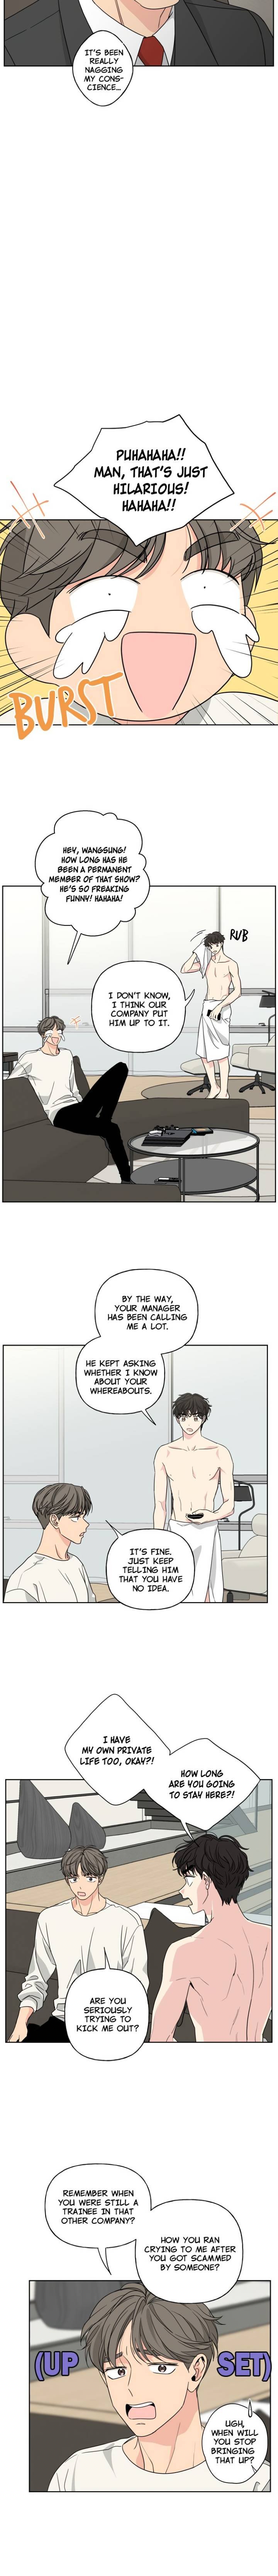 mother-im-sorry-chap-35-7